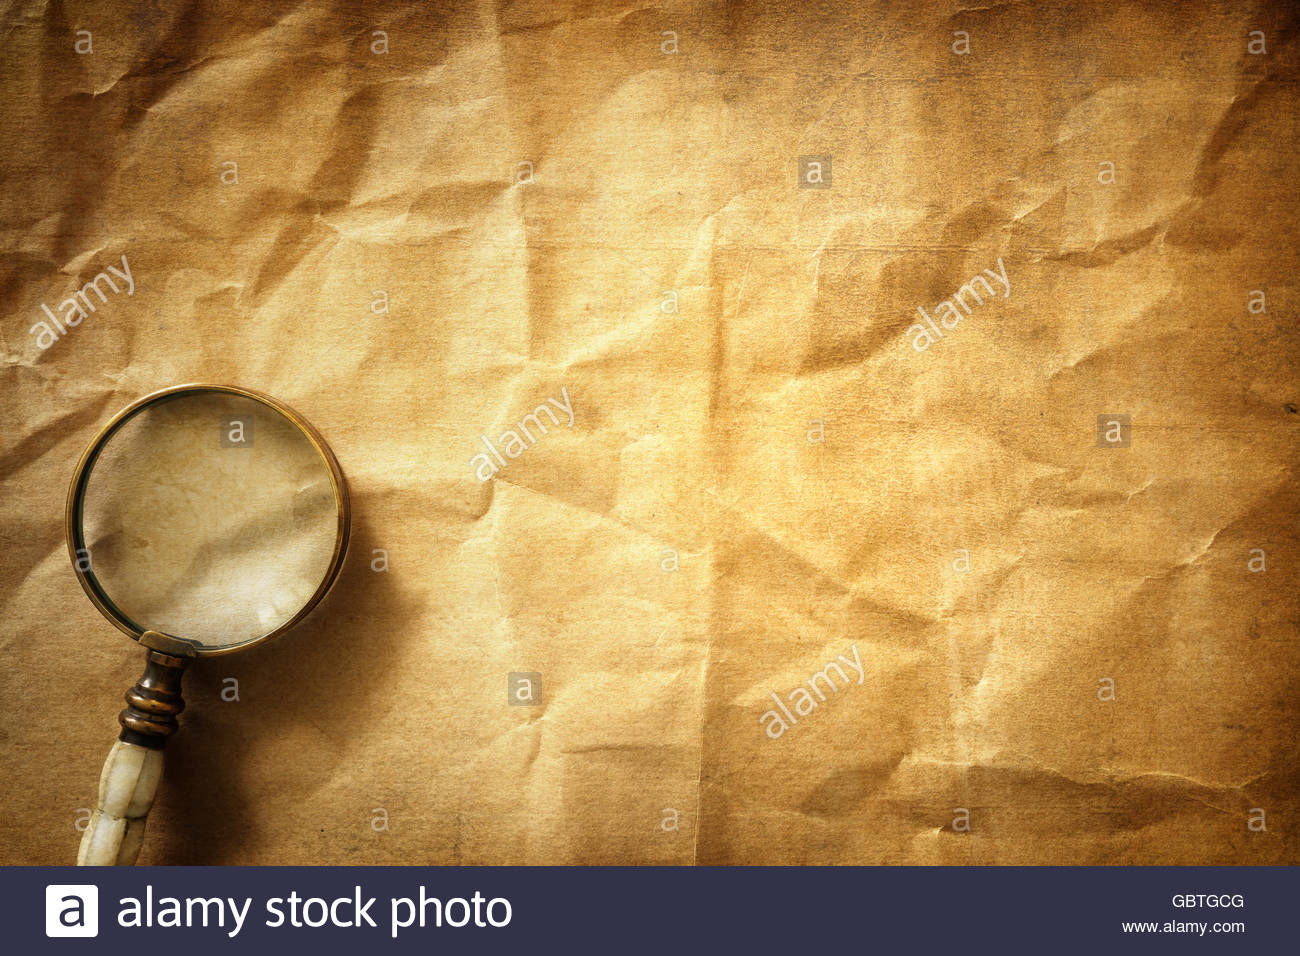 Vintage Background With Magnifying Glass Stock Photo